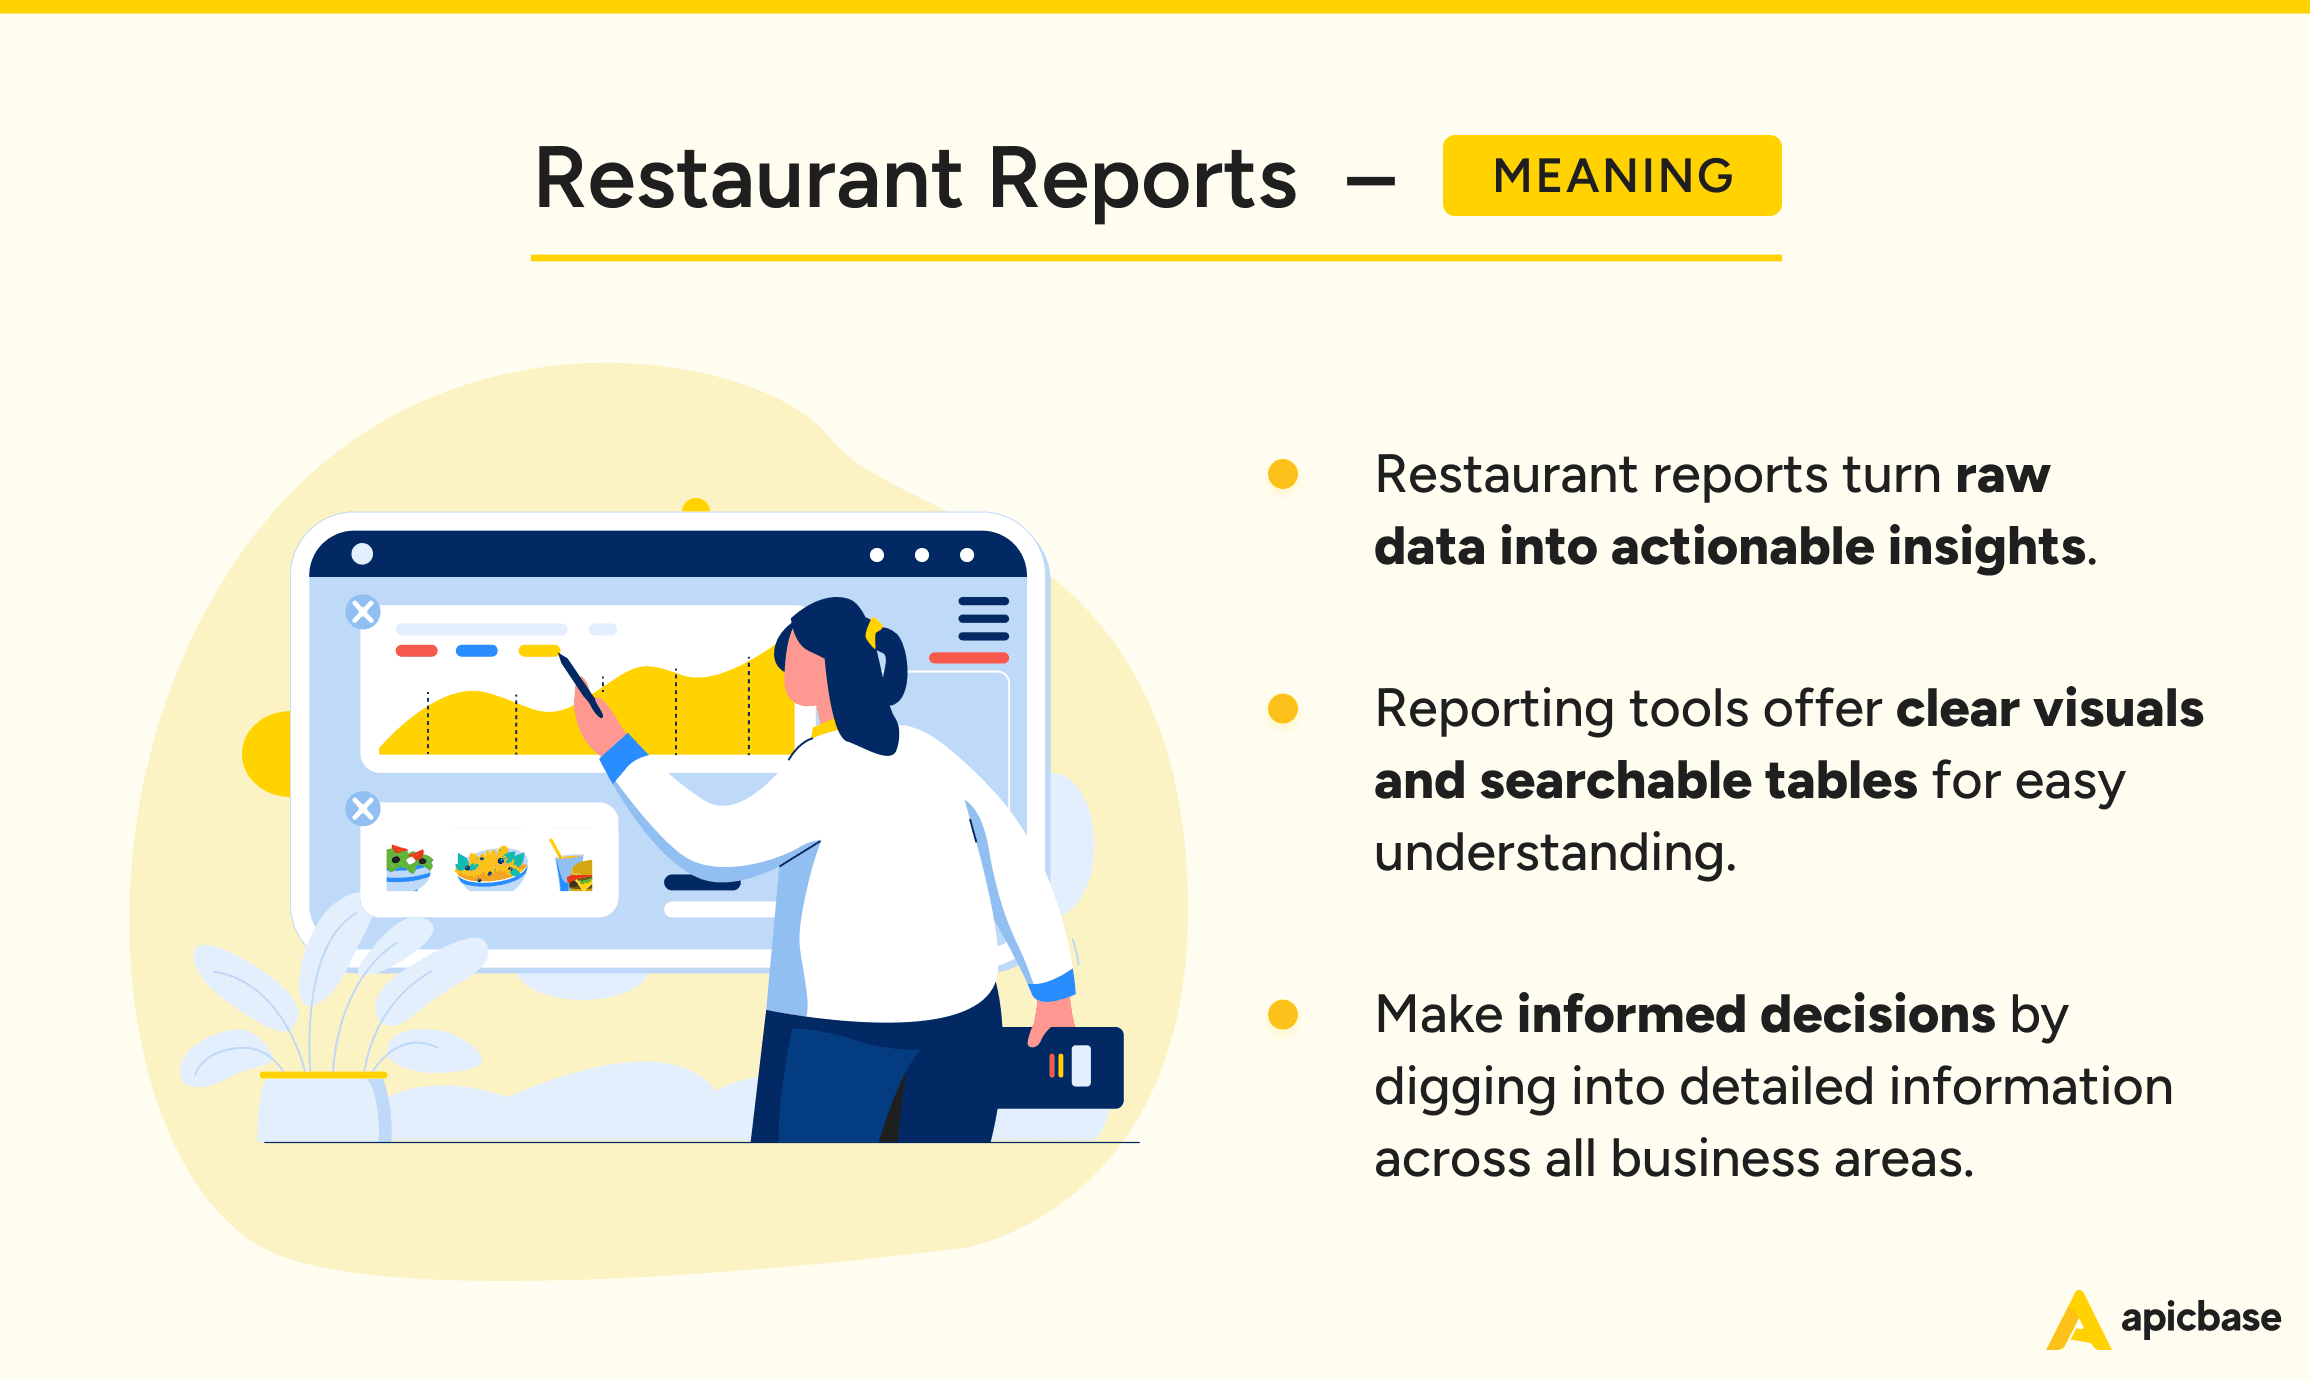 Restaurant Reports Meaning